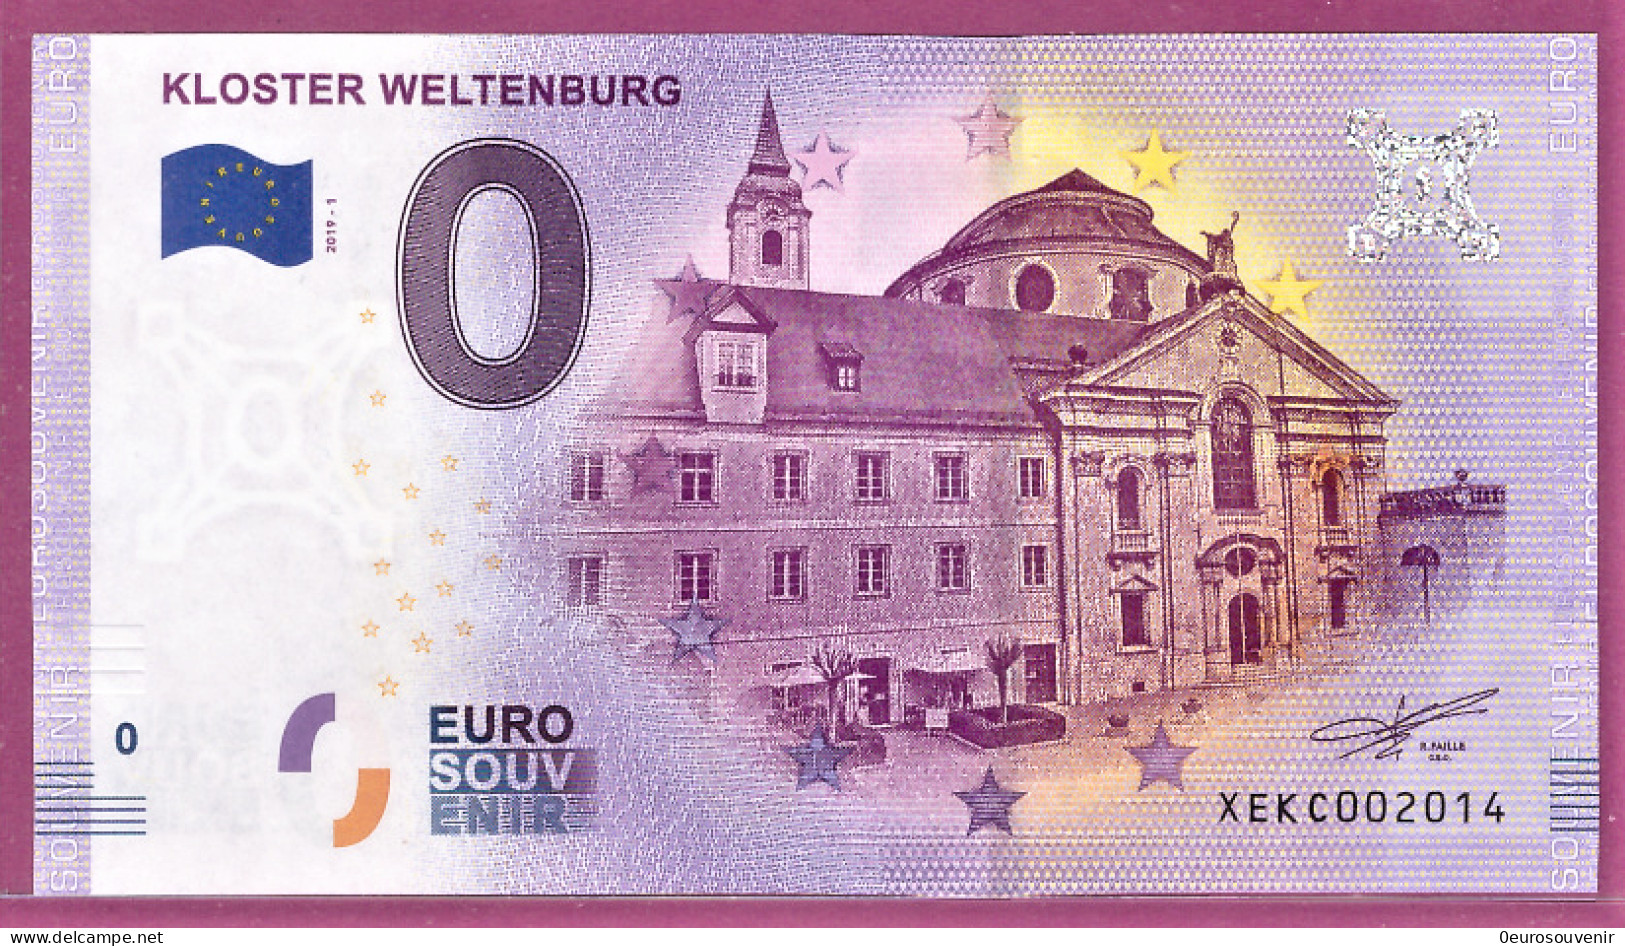 0-Euro XEKC 2019-1 KLOSTER WELTENBURG - Private Proofs / Unofficial